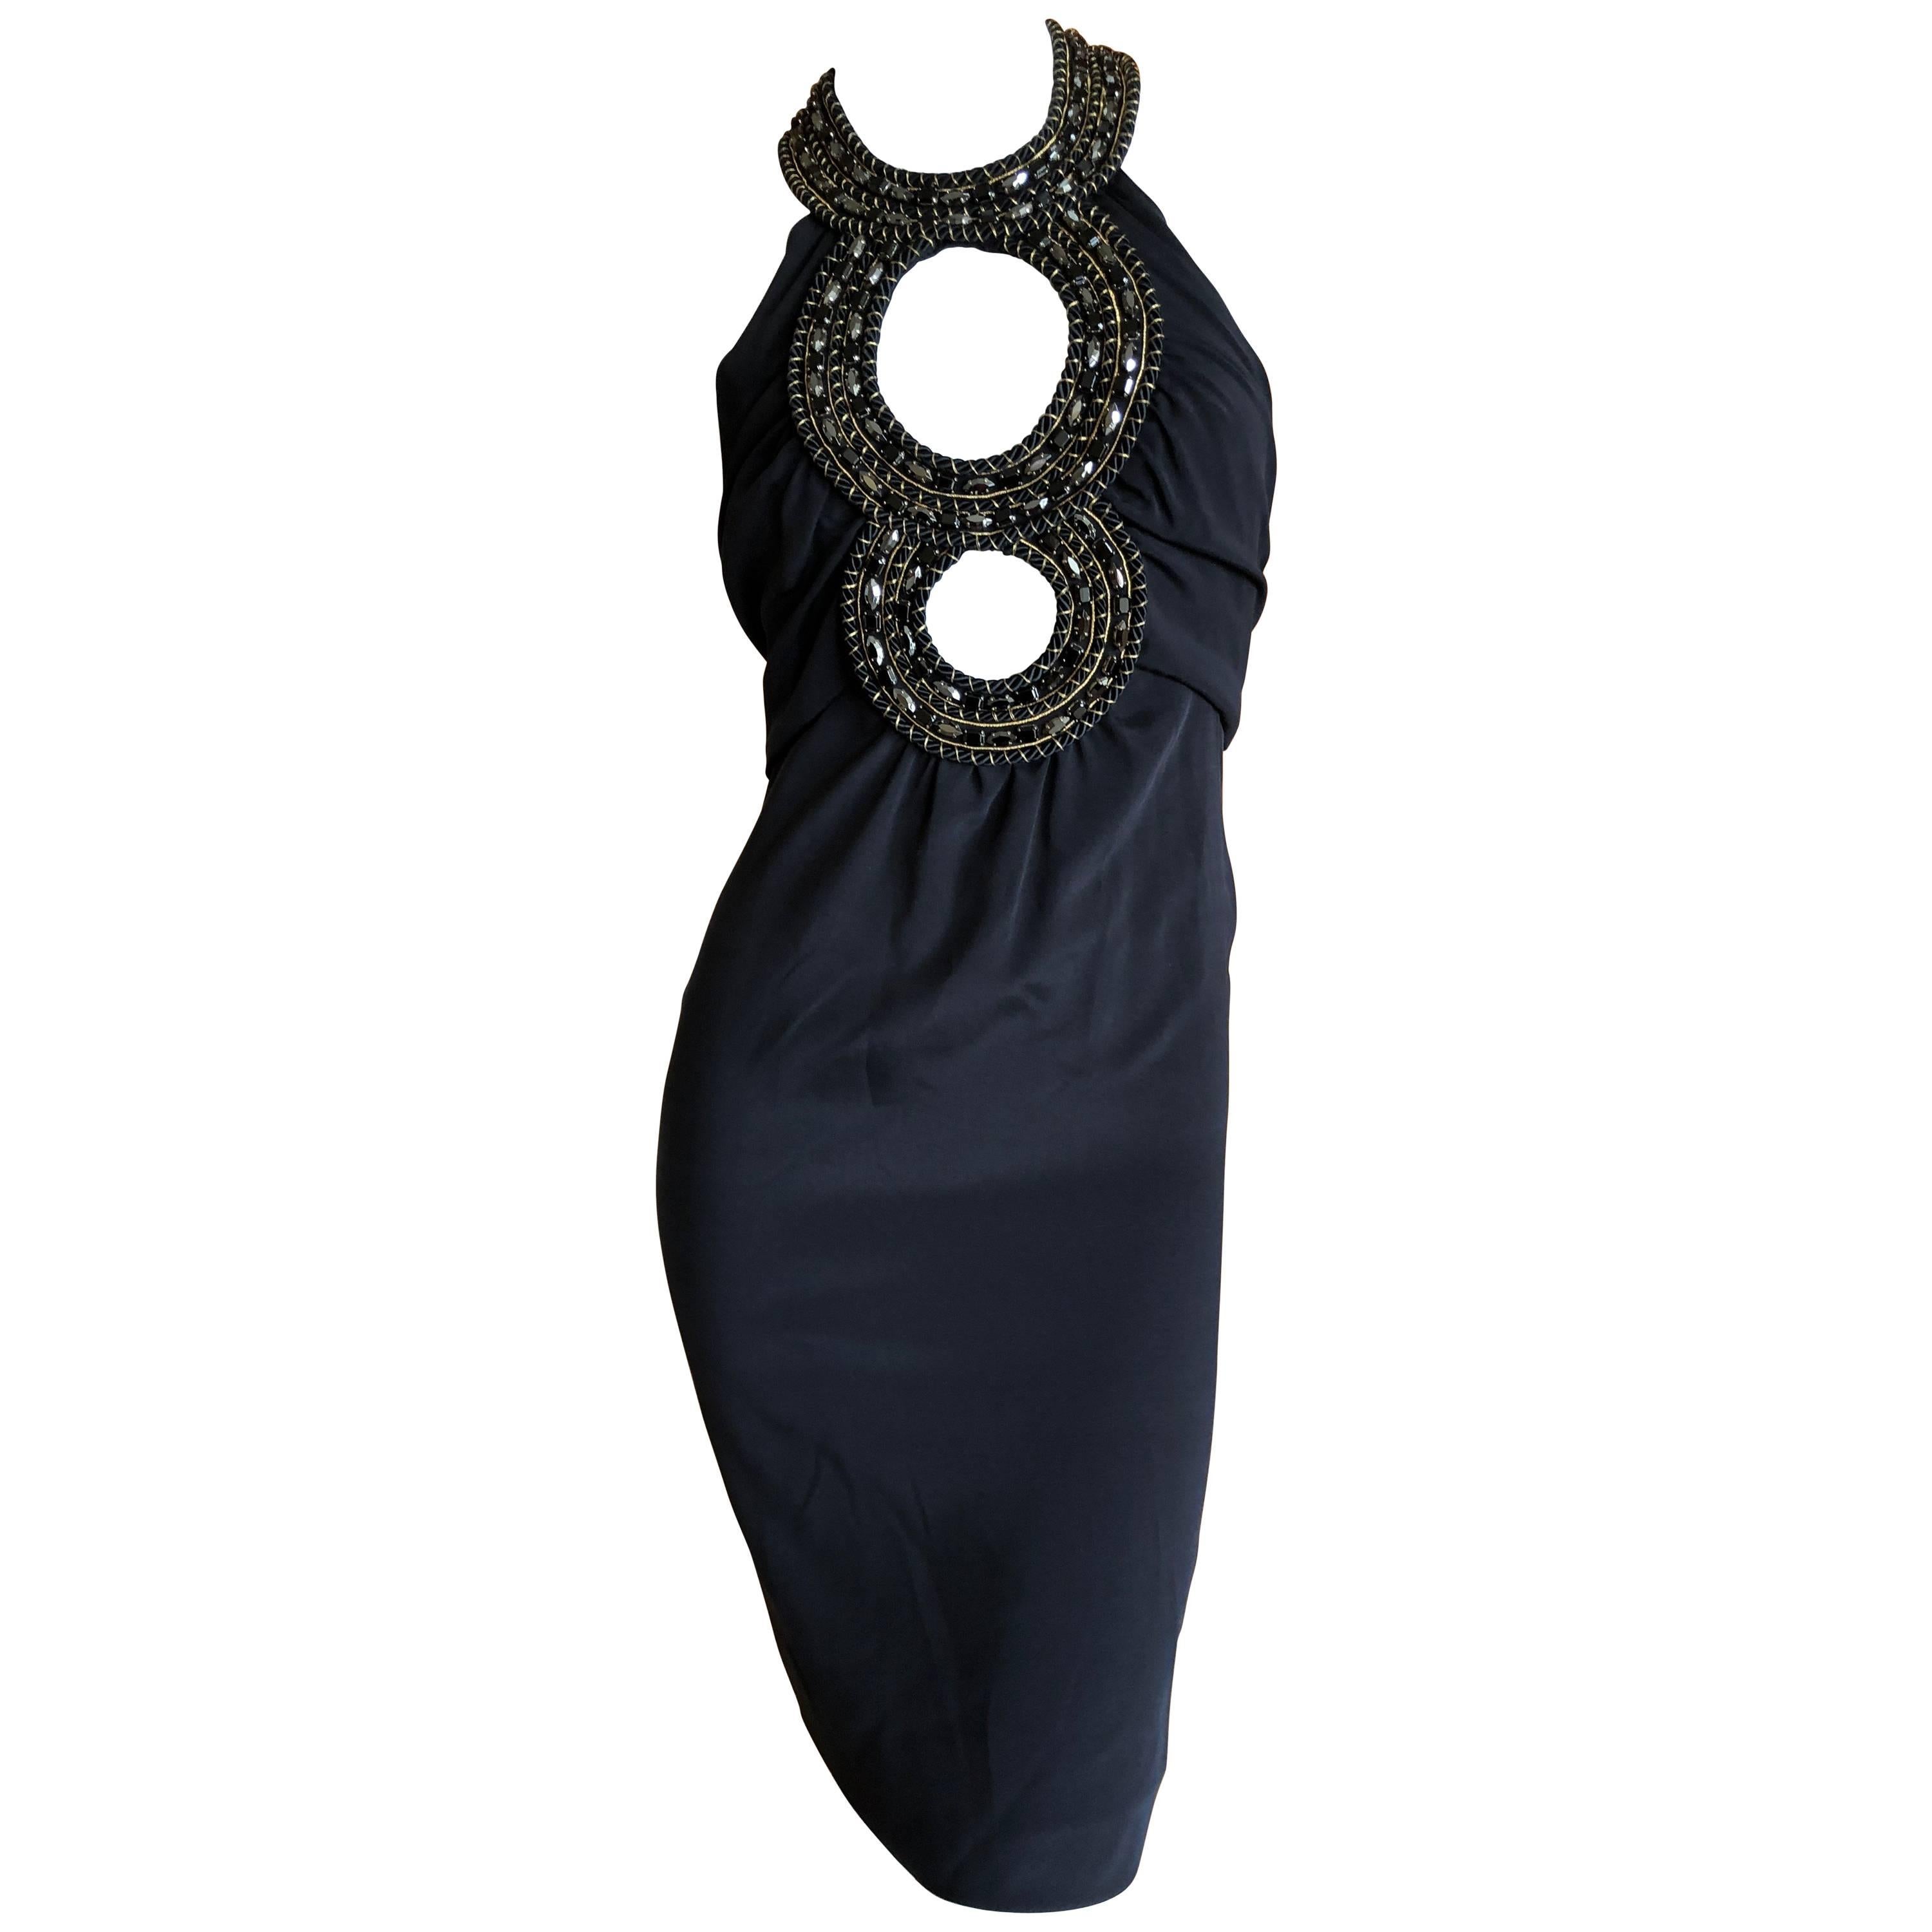 Azzaro Iconic Keyhole Backless Dress with Crystal and Cording Details For Sale